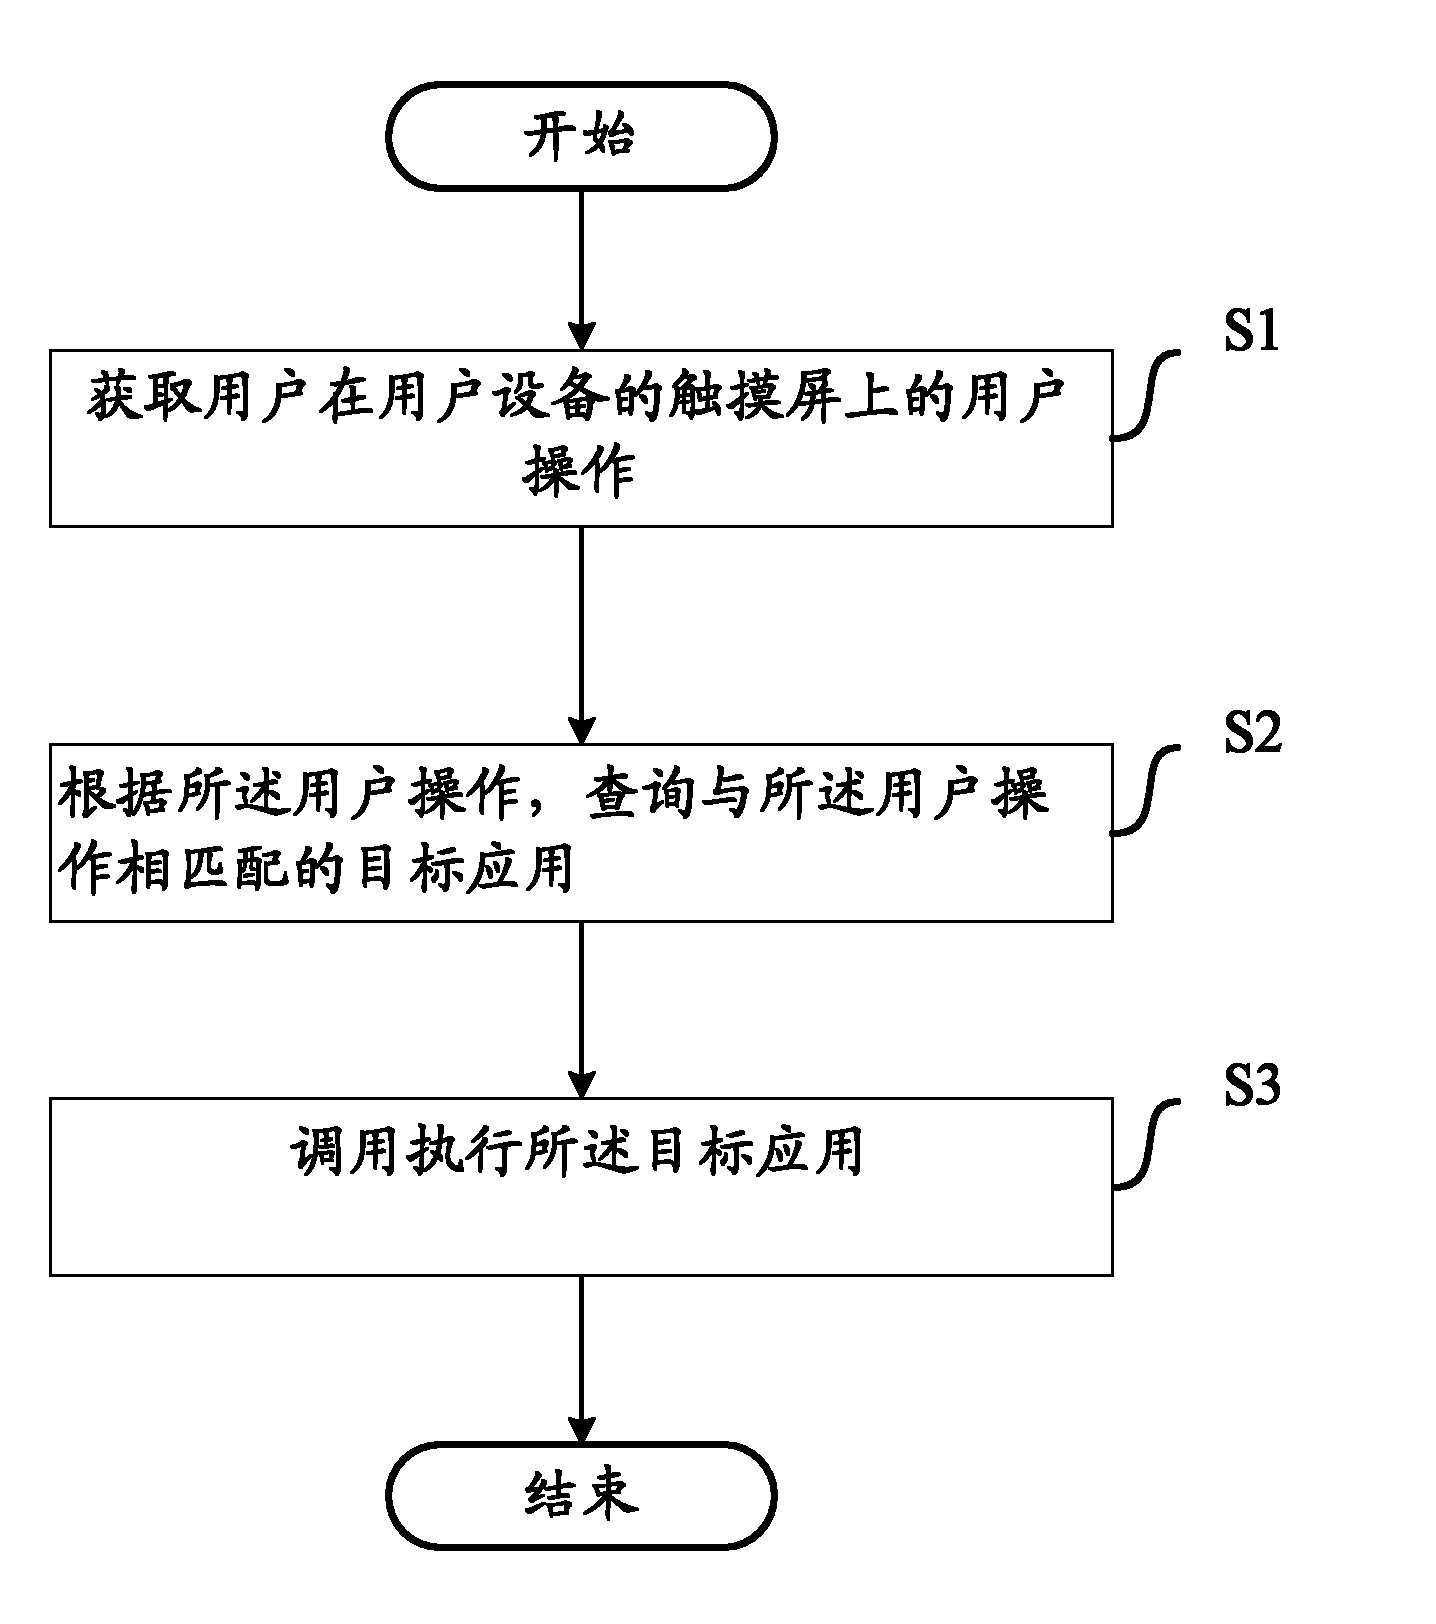 Method and device for scheduling application according to touch screen operation of user